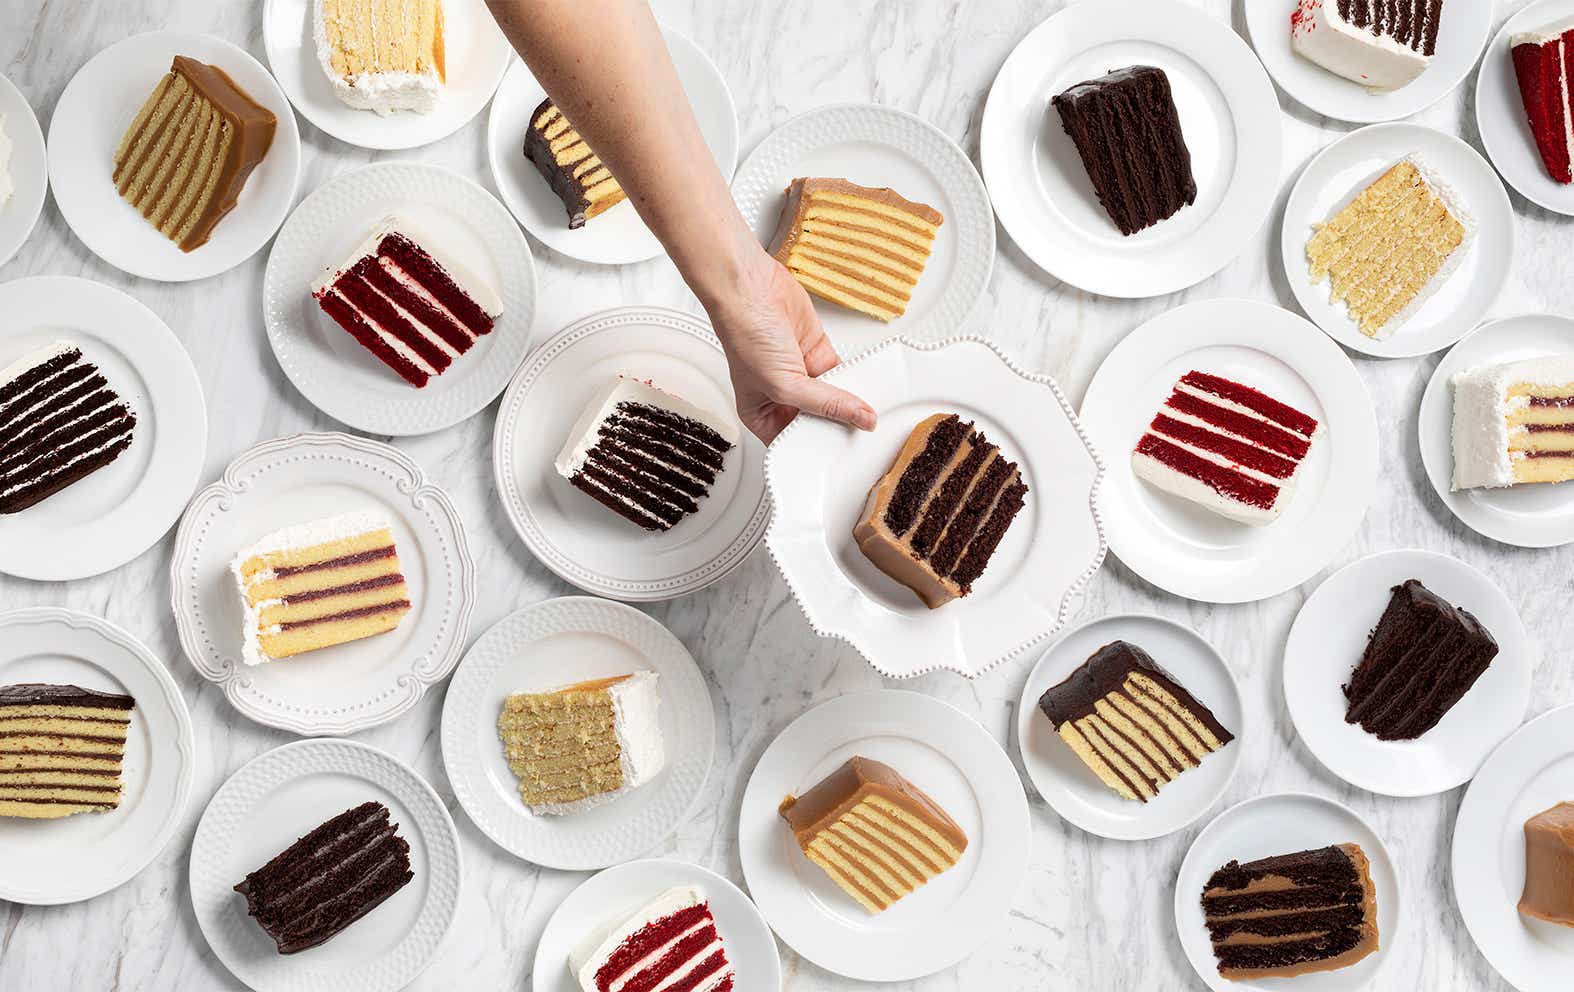 Slices of different cakes on plates